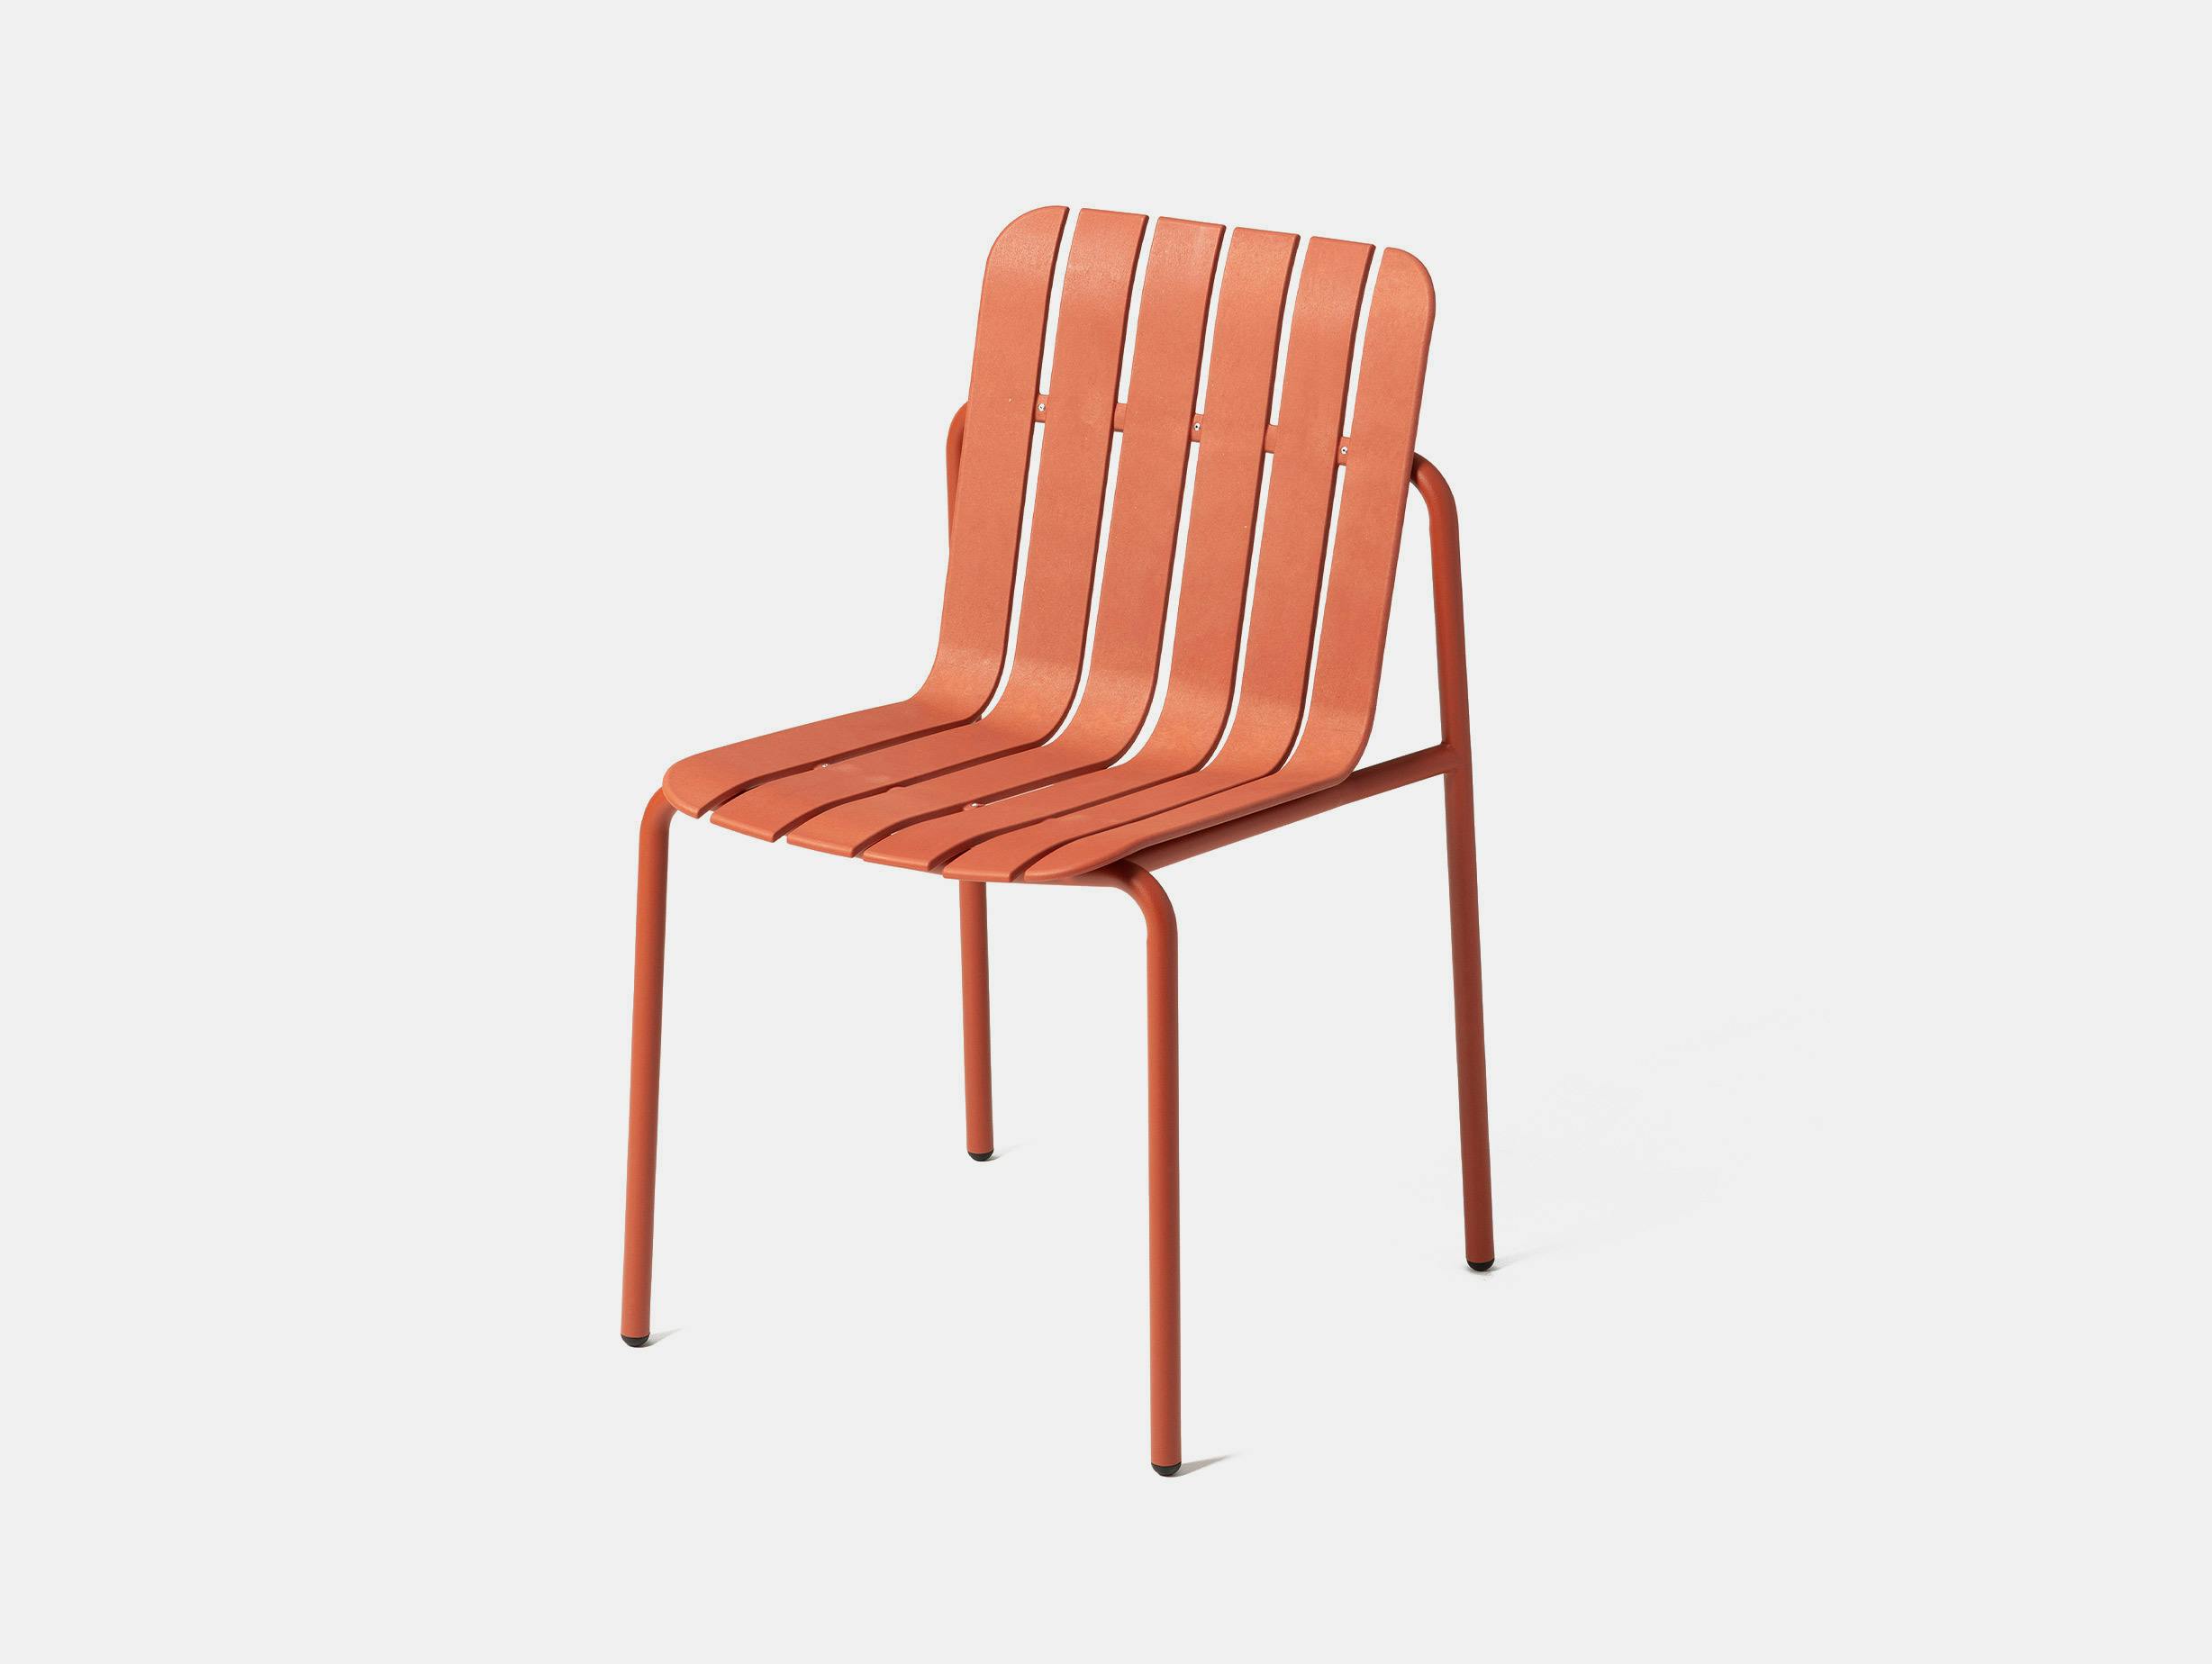 Very good and proper ac al latte chair red brick no arms2